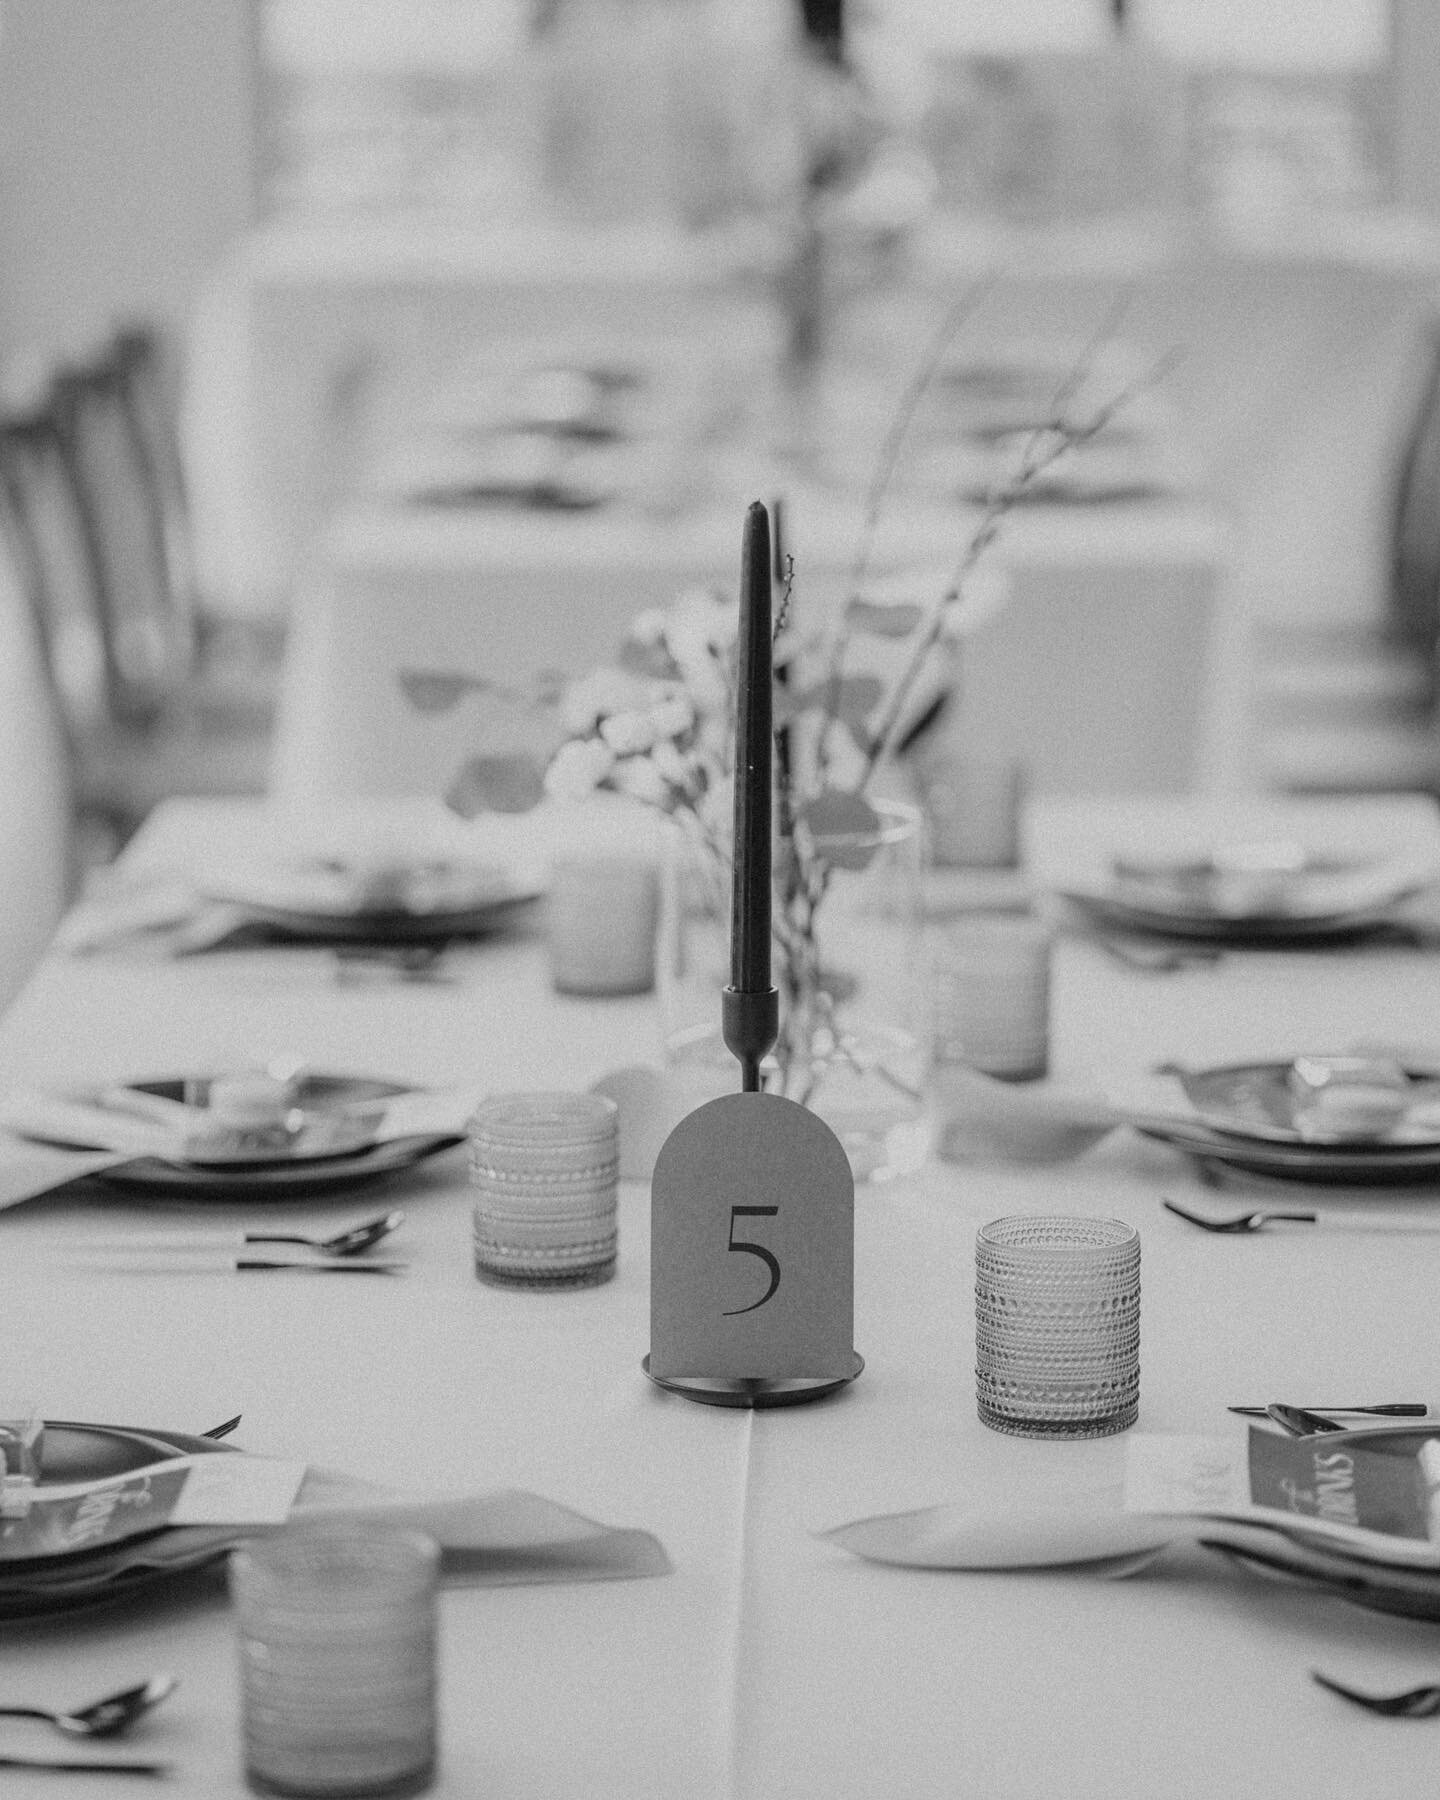 Our arch table numbers (with a thank you message on the reverse side) sitting pretty for this beautiful, dreamy wedding~
@bradleyandliza @multamediaboss @lizaotovo
&mdash;
P.S. This beautiful couple had alpaca ring bearers 🥹😍
⠀⠀⠀⠀⠀

⠀⠀⠀⠀⠀
 
#muteds